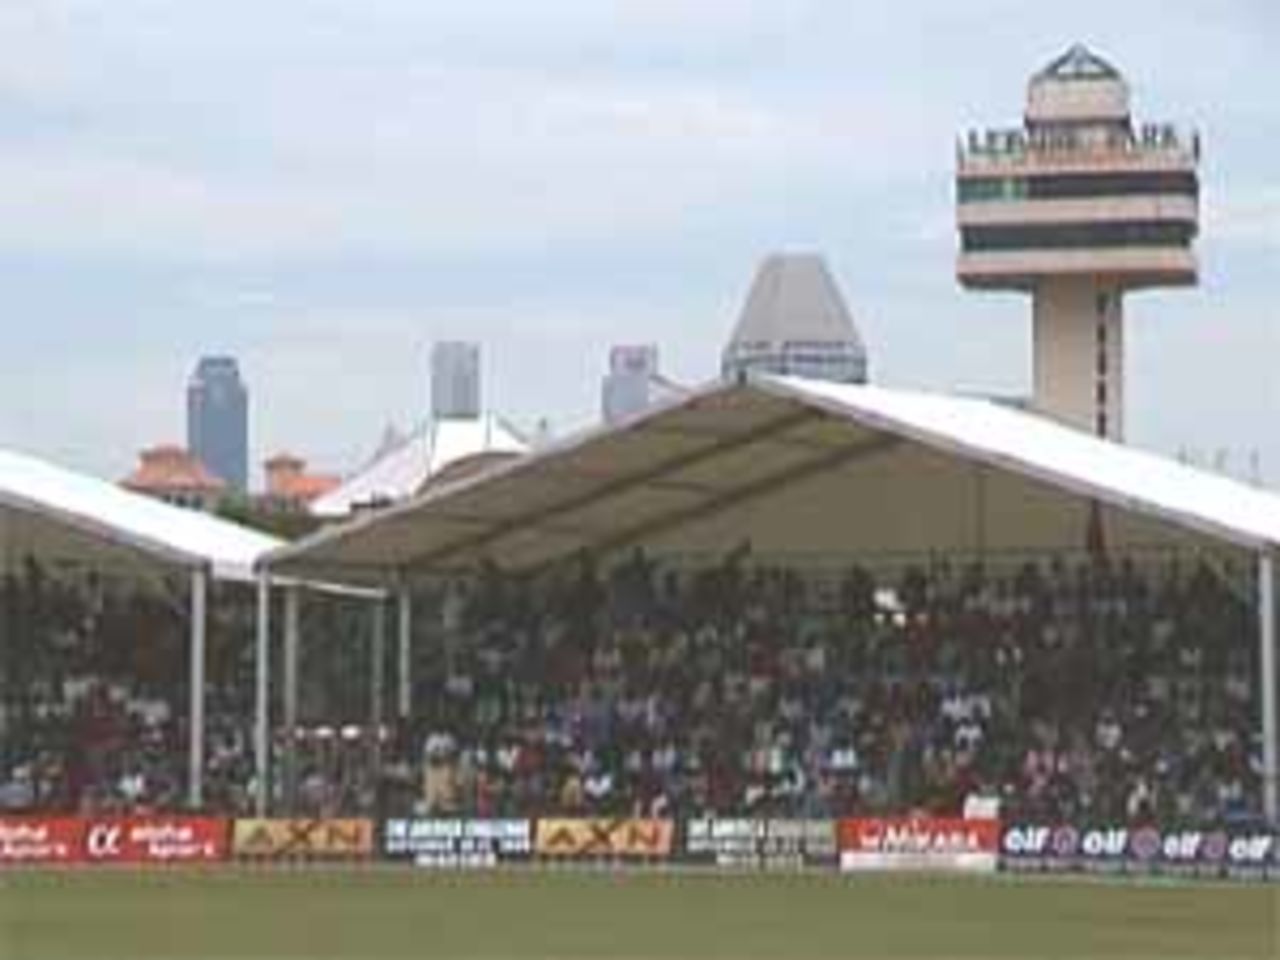 A view of the crowds at the Kallang Ground, India v West Indies (3rd ODI), Coca-Cola Singapore Challenge, 1999-2000, Kallang Ground, Singapore, 5 Sep 1999.